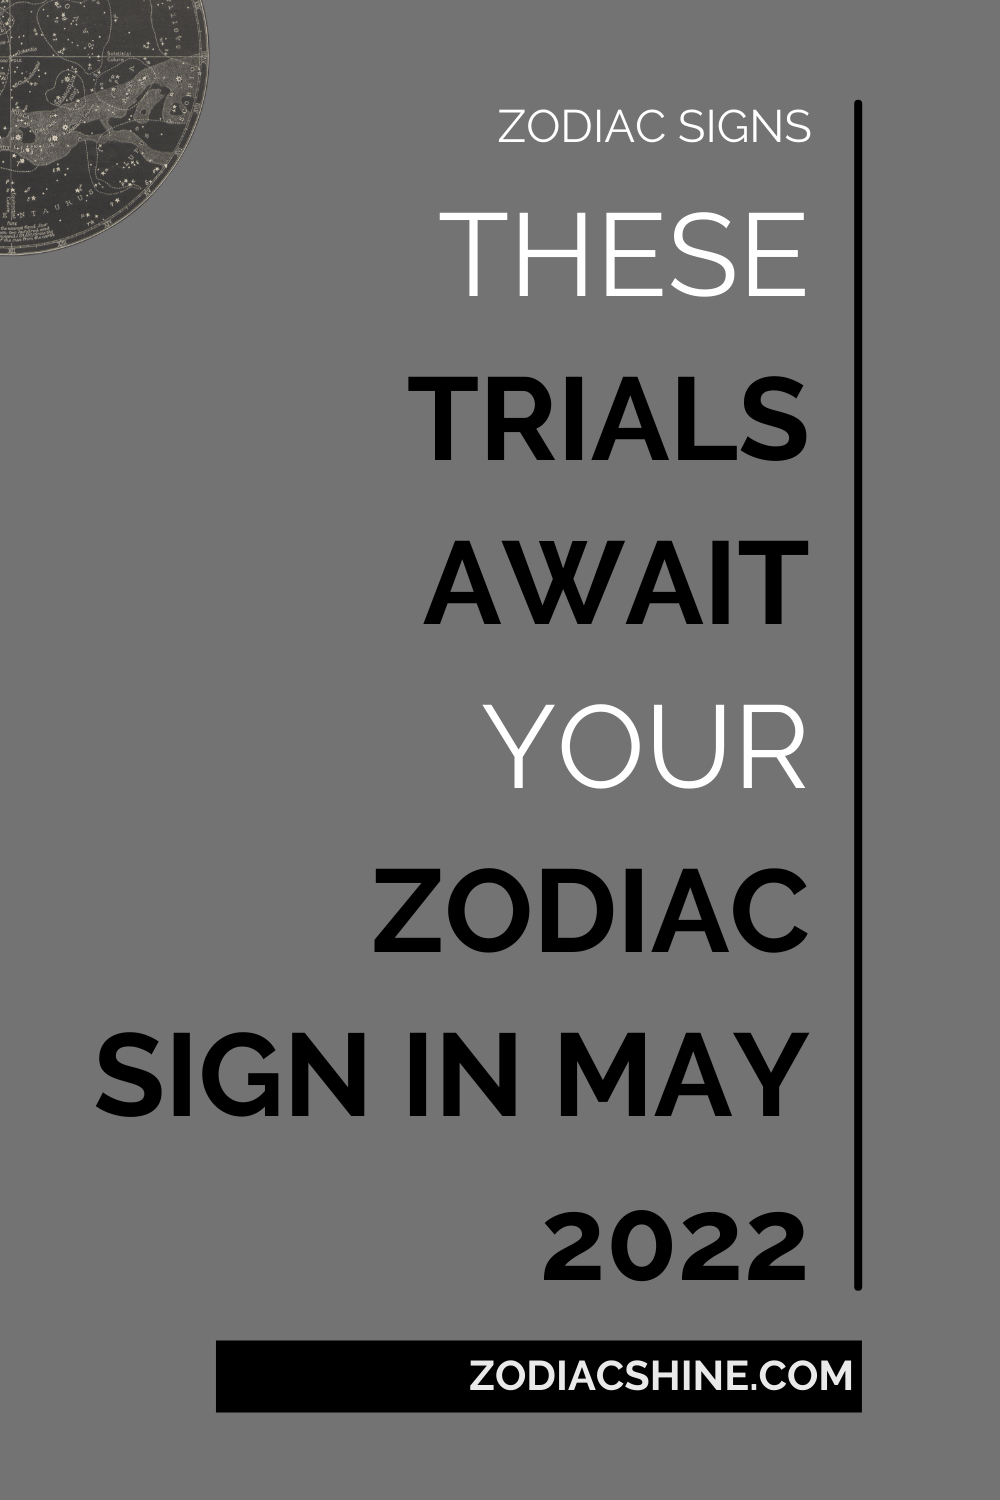 These Trials Await Your Zodiac Sign In May 2022